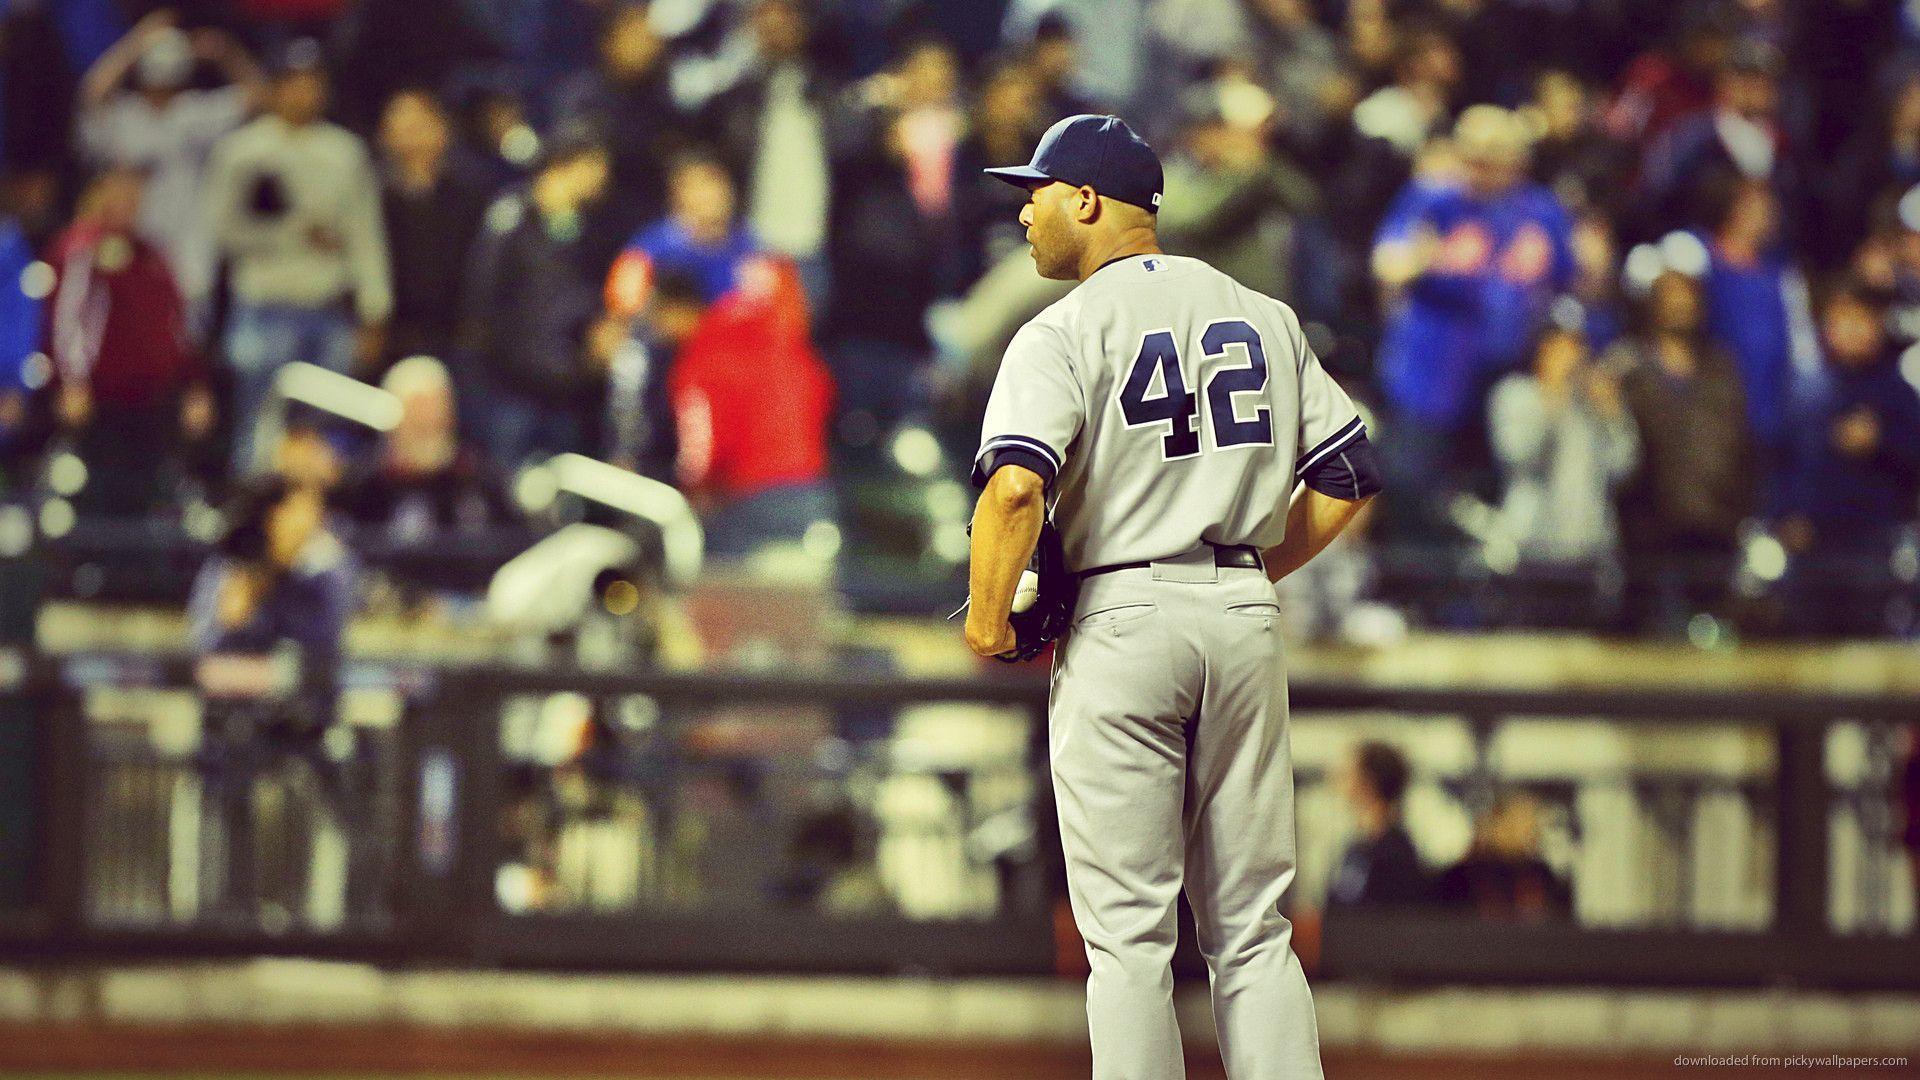 Mariano Rivera 42 On Position Picture For iPhone, Blackberry, iPad